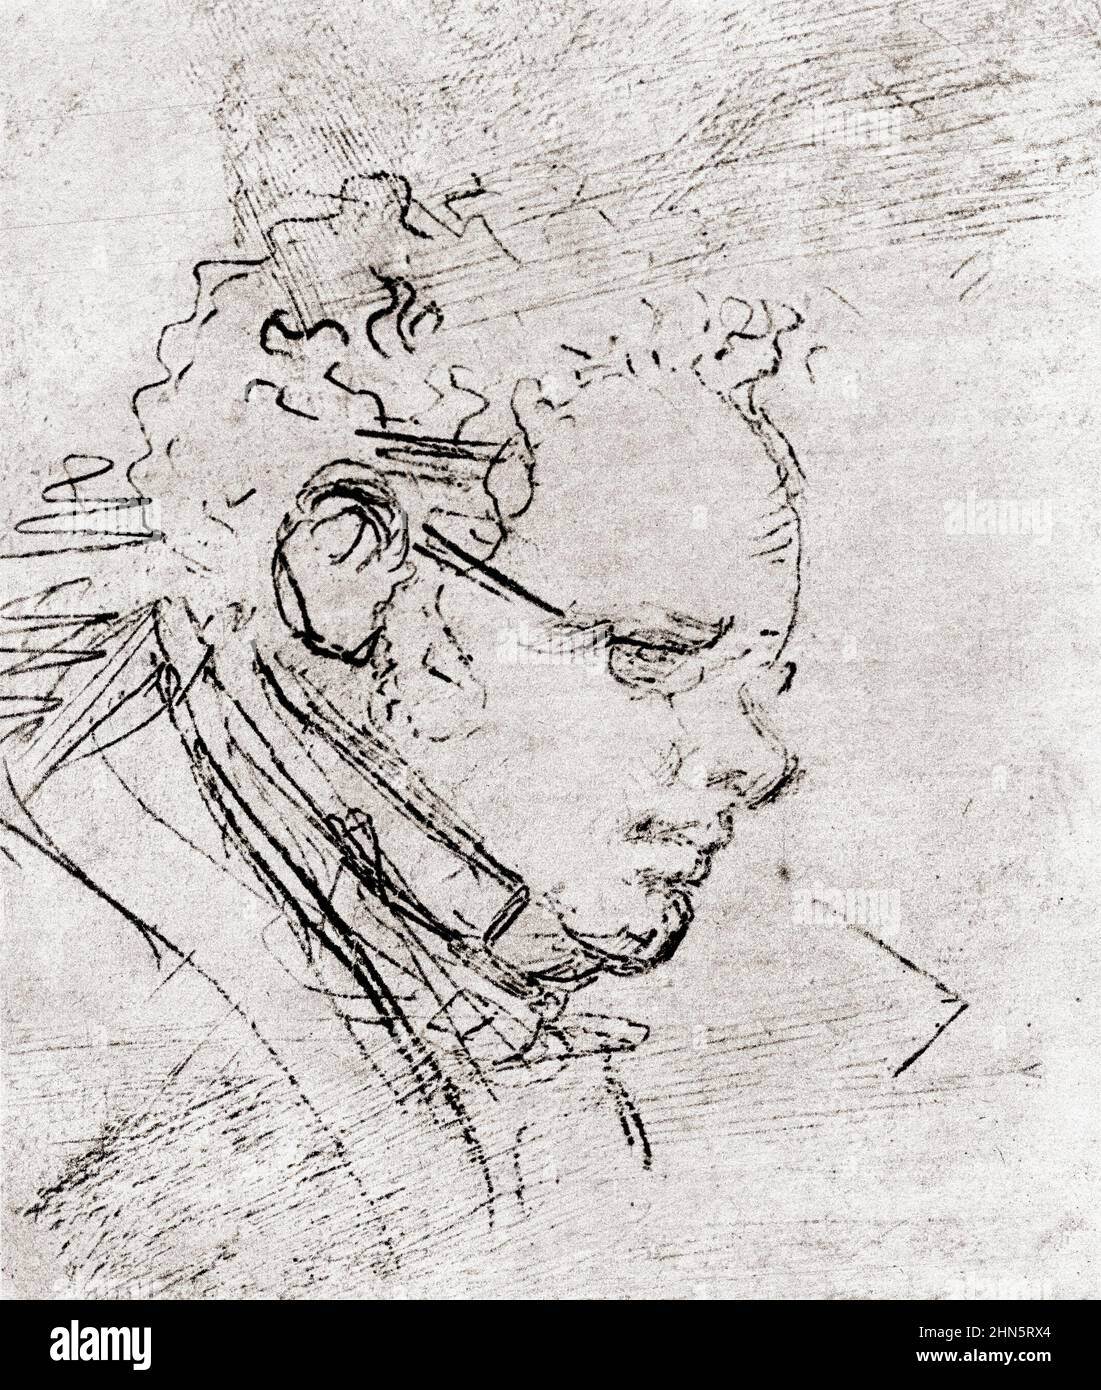 Franz Peter Schubert, 1797 – 1828. Austrian composer.  After a drawing by one of his friends, Moritz von Schwind, 1820.  From The Golden Age of Vienna, published 1948. Stock Photo